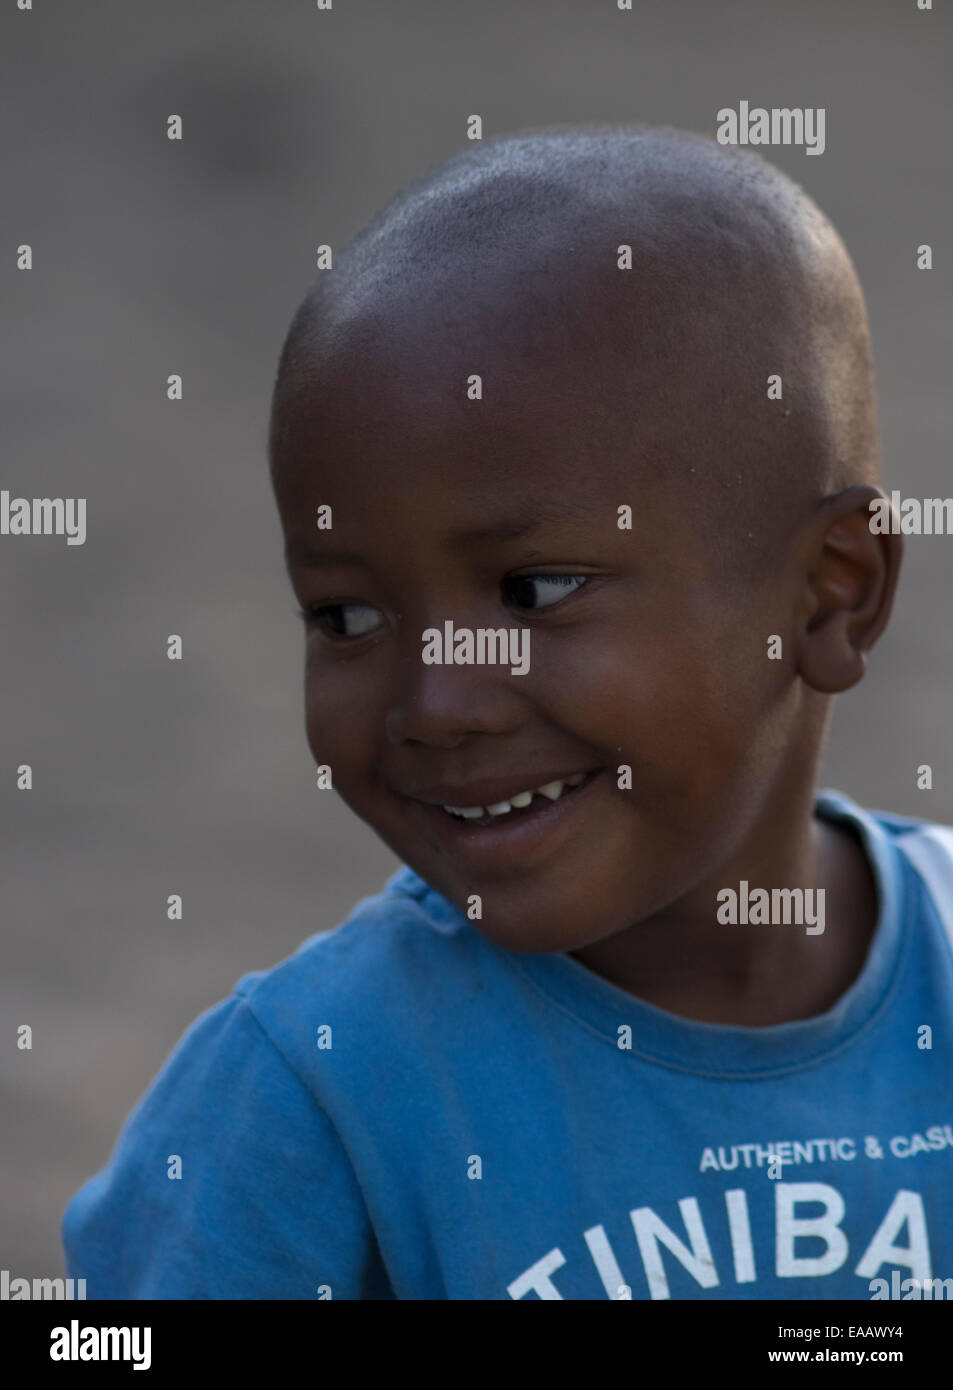 A smiling African child in Madagascar Stock Photo